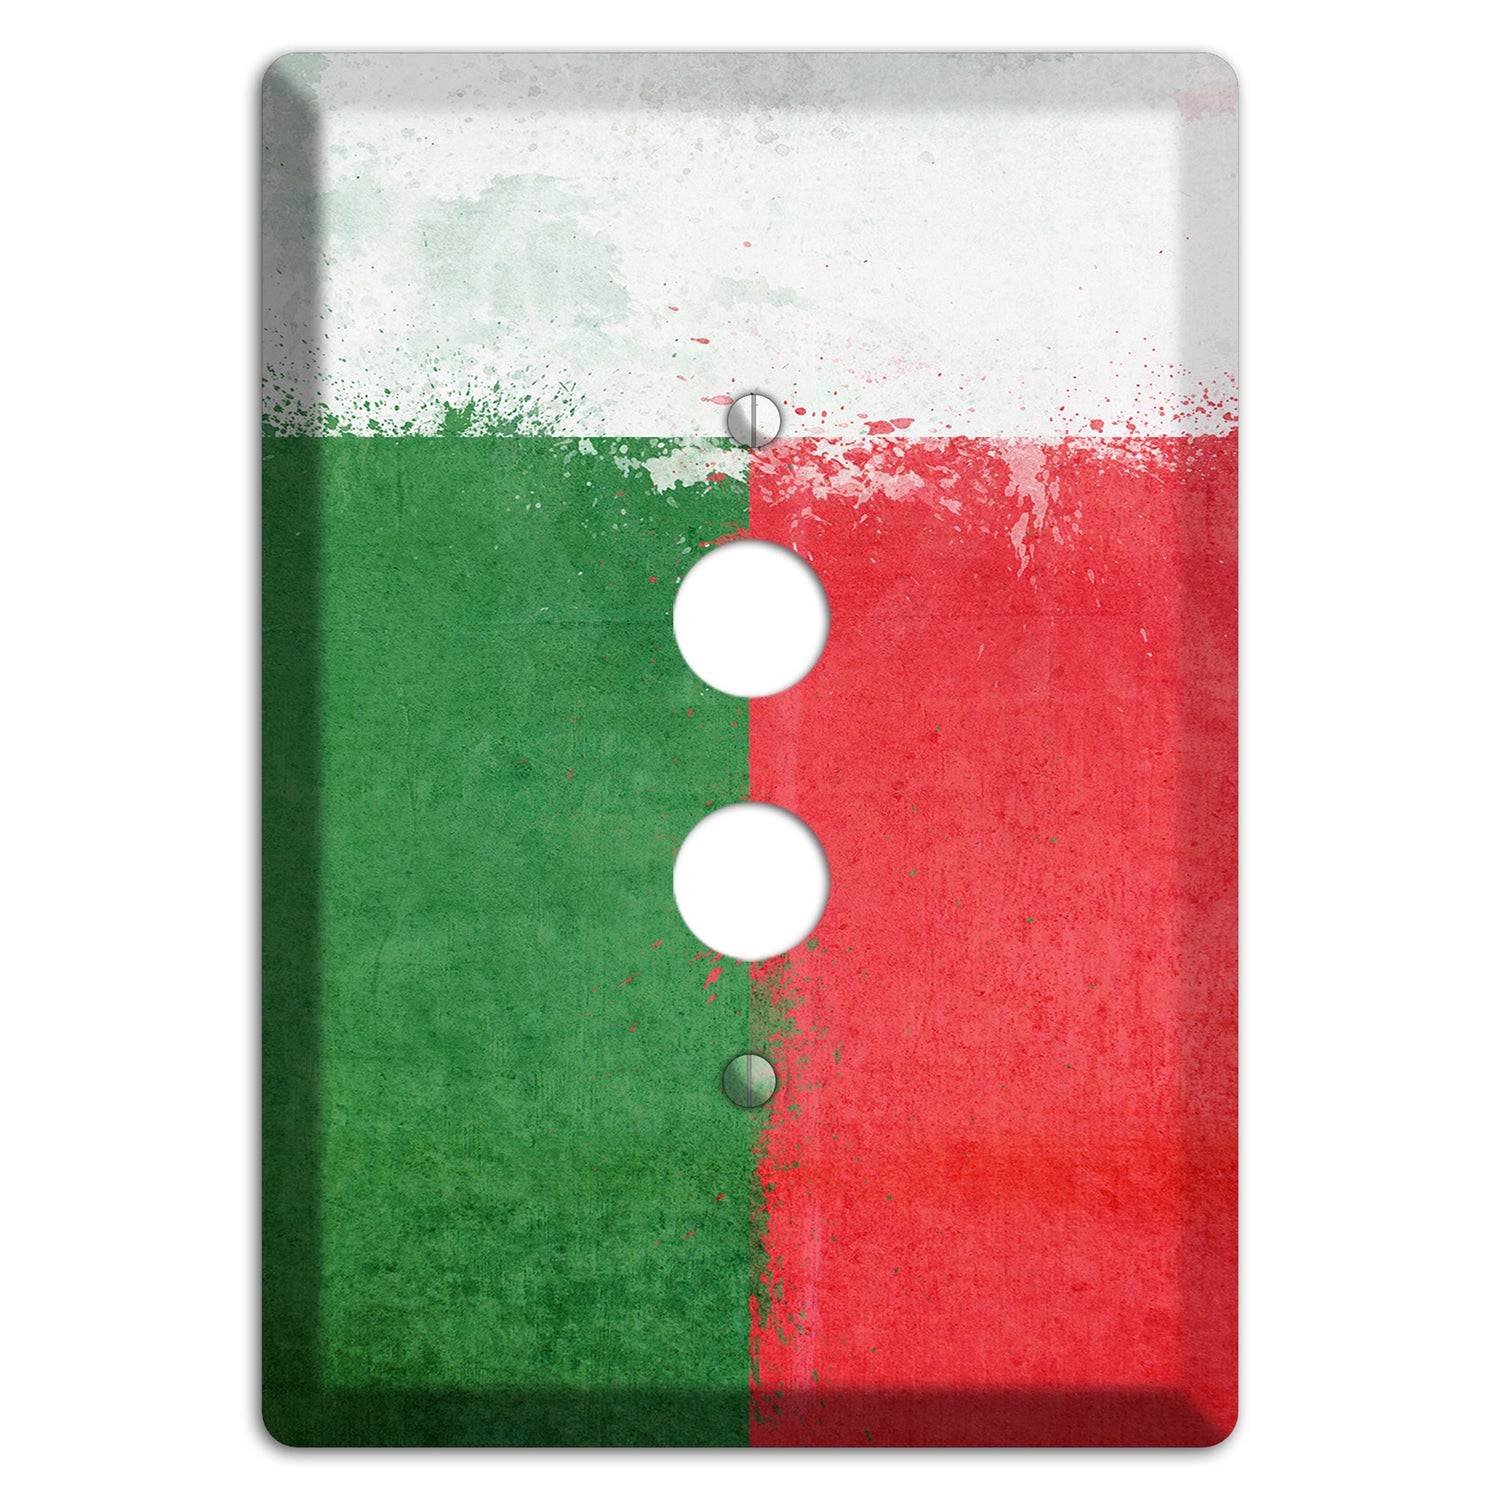 Madagascar Cover Plates 1 Pushbutton Wallplate